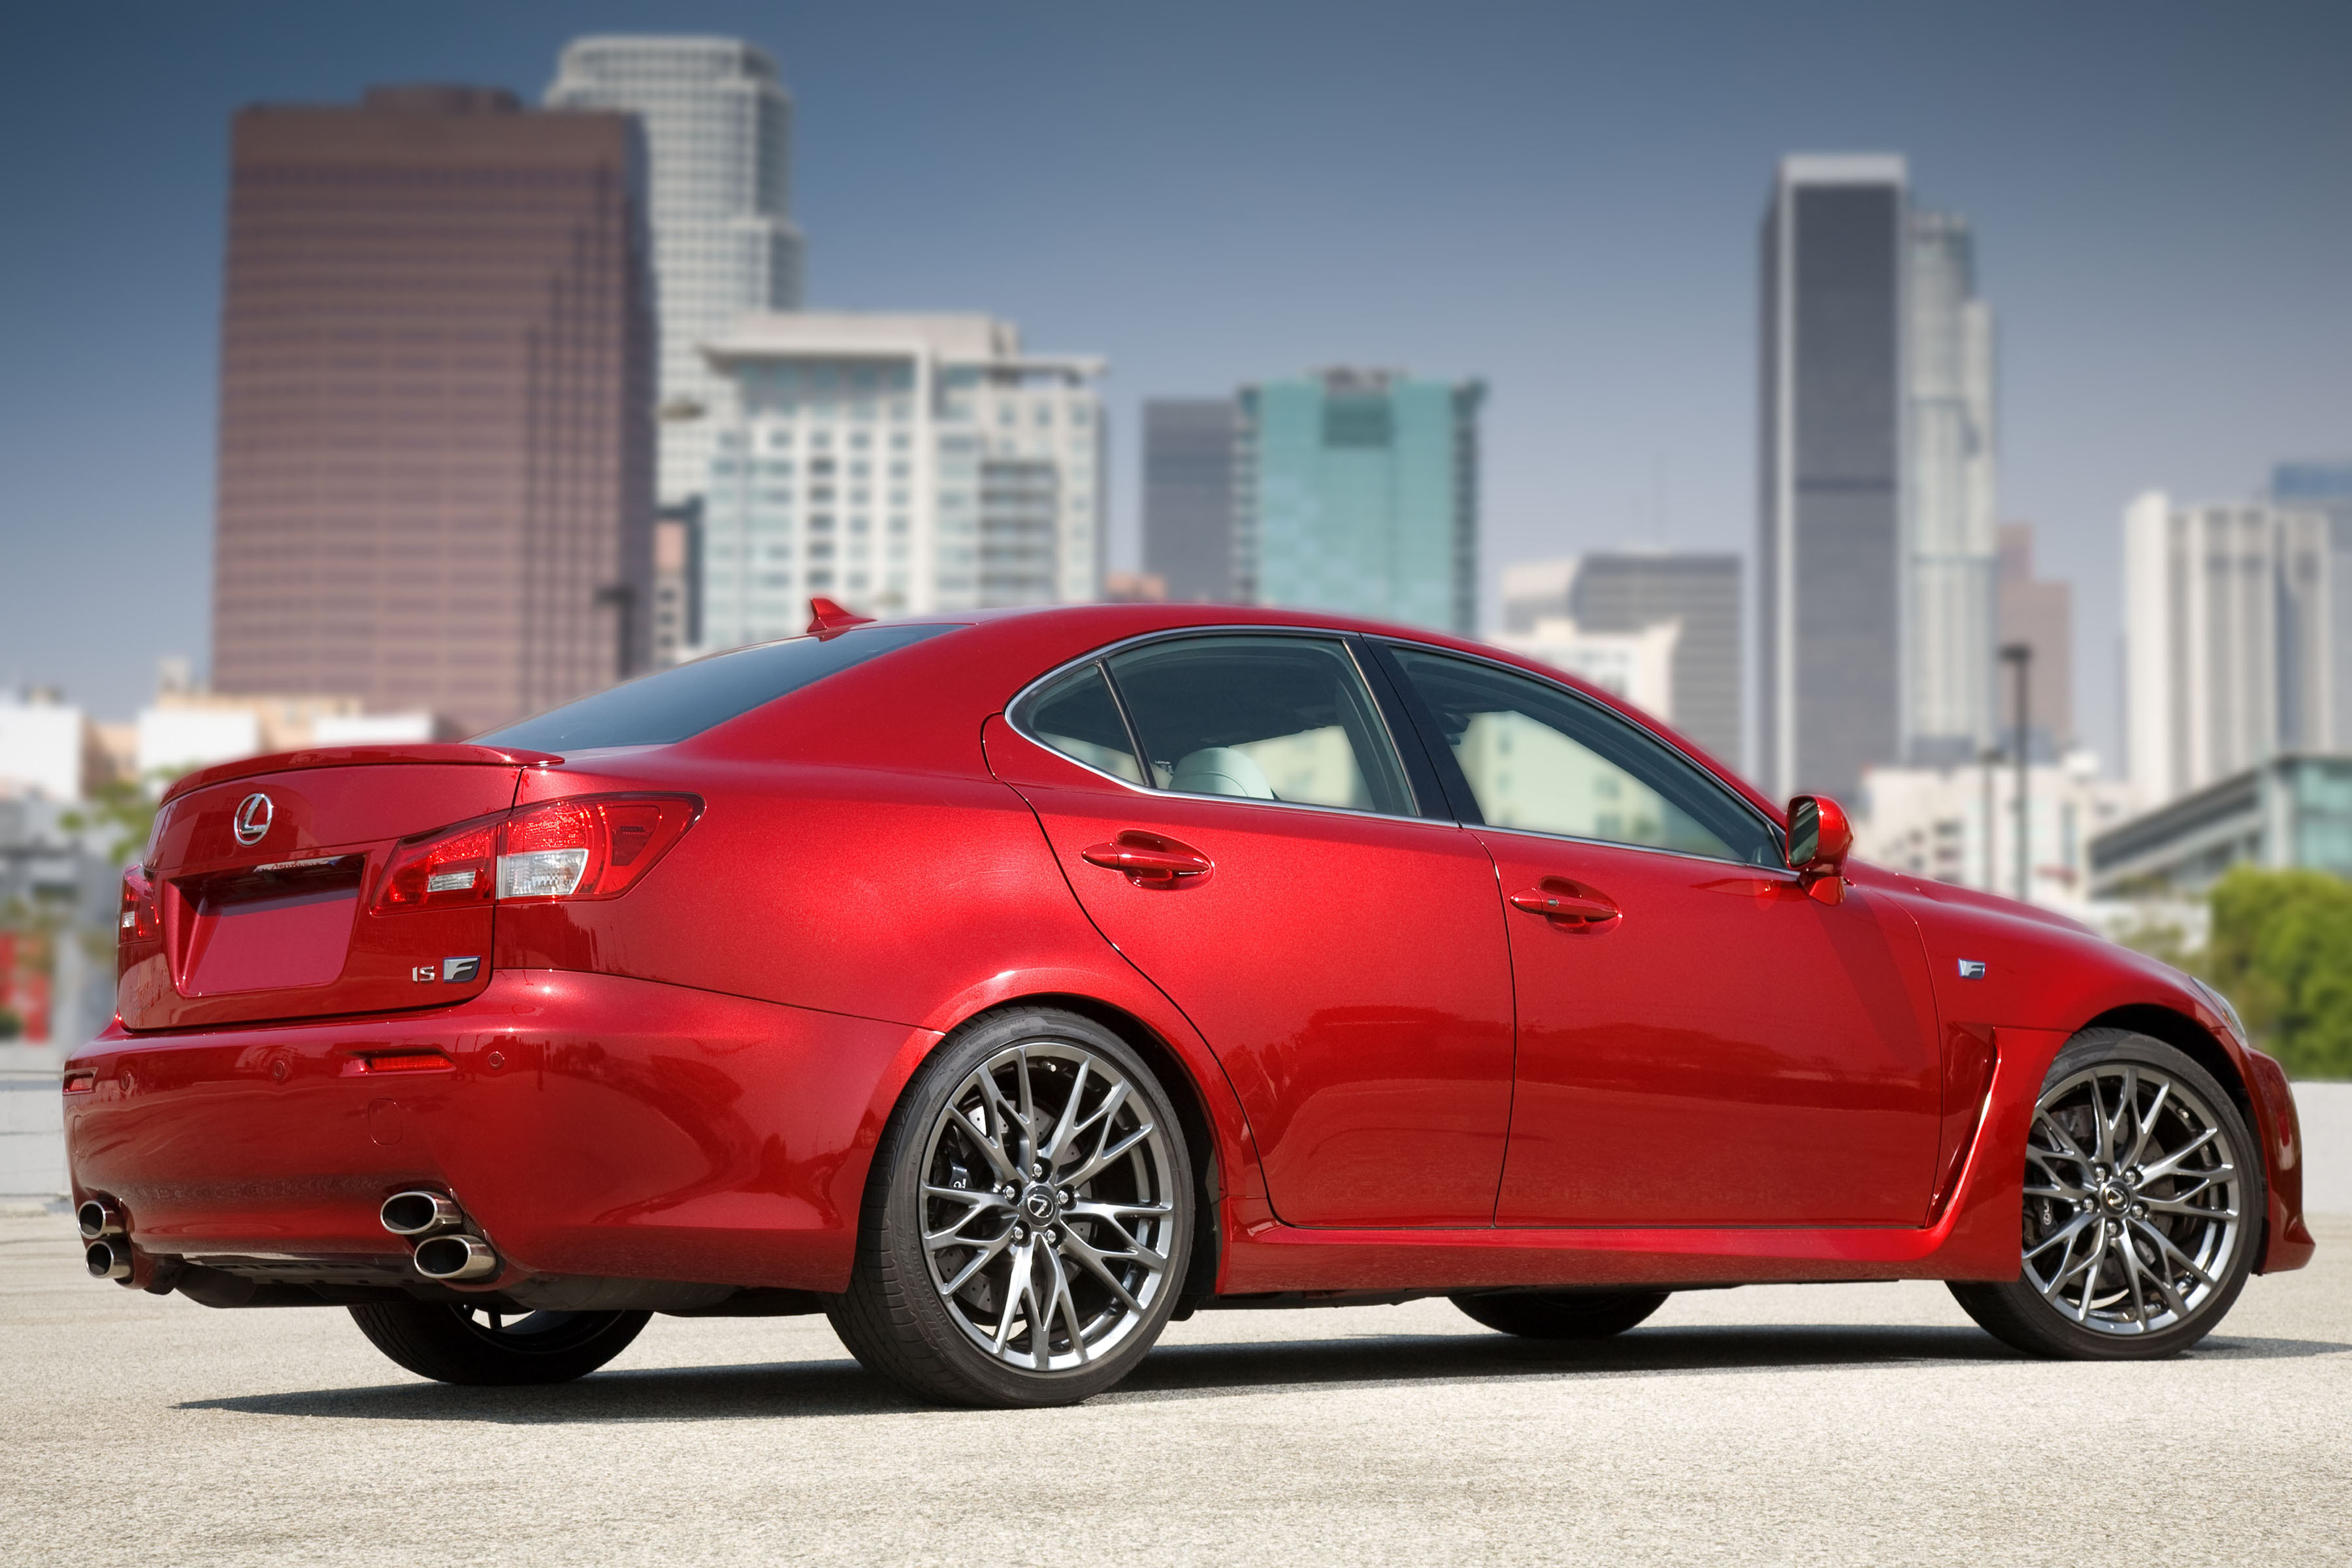 2012 Lexus IS F Gets A New Set Of Wheels, Interior Option